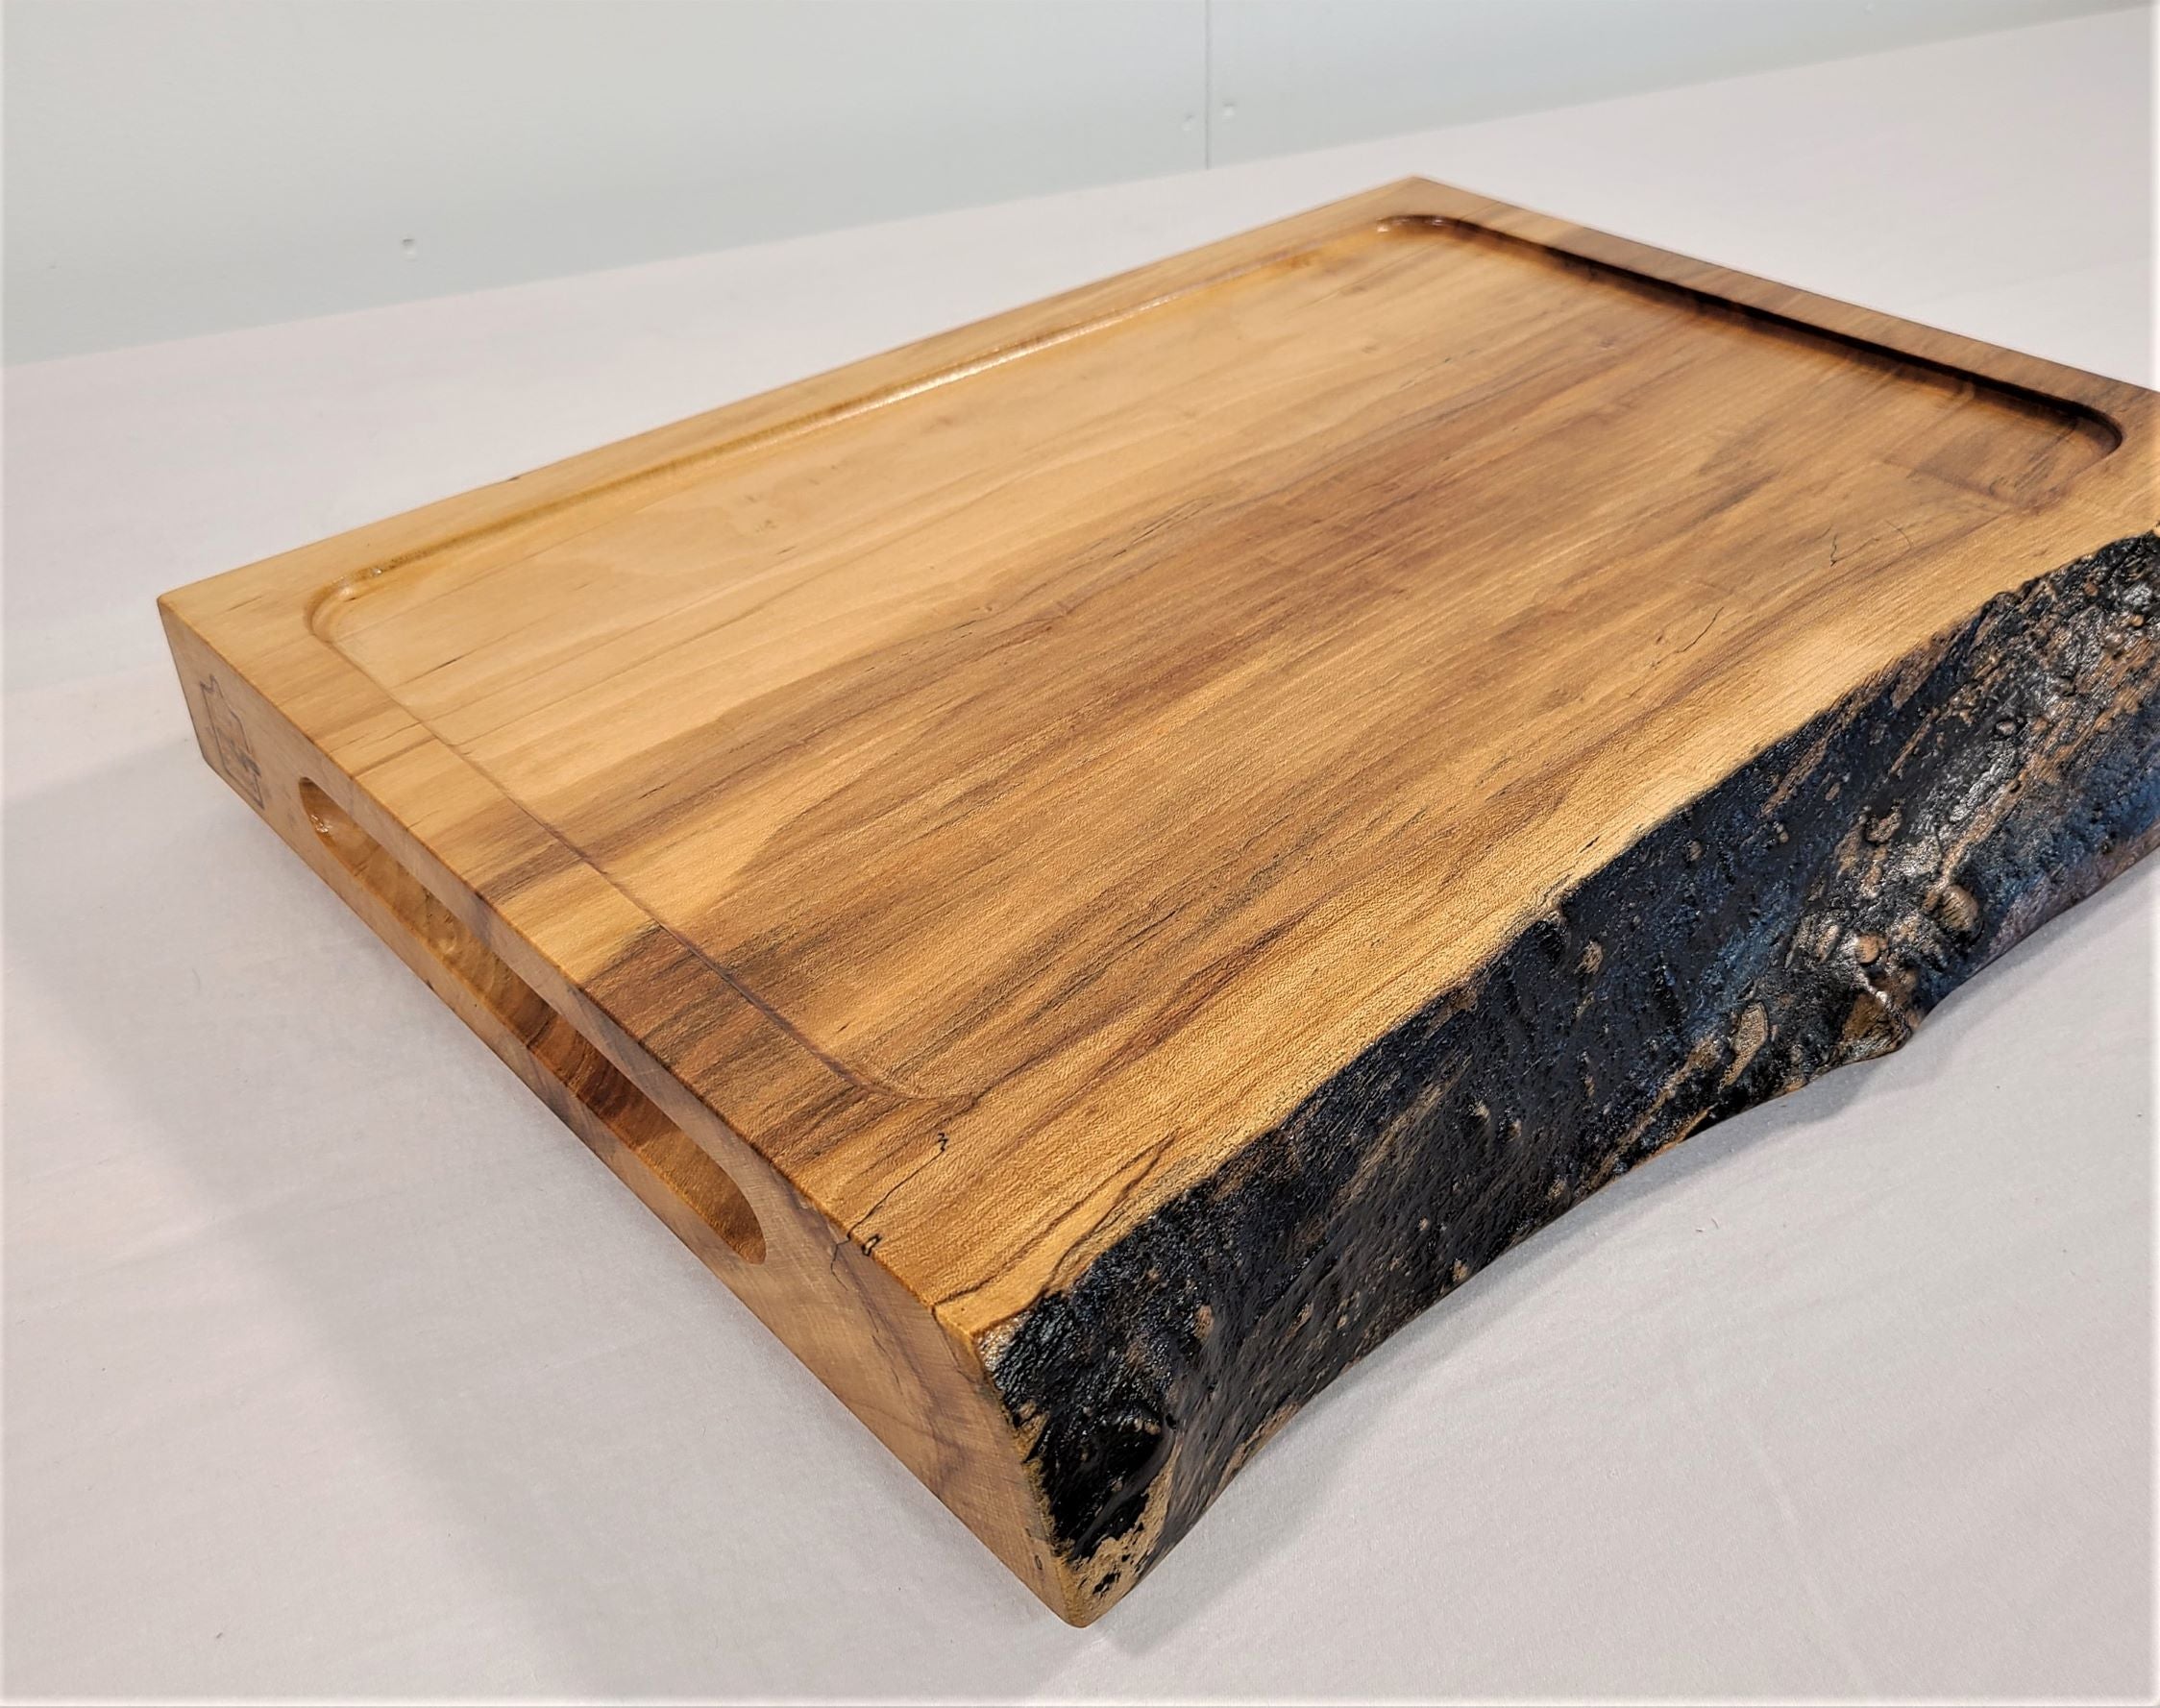 Large Thick  maple cutting board with a live edge.  Features a scooped out center area to accommodate drippings from large  meat and poultry.  Routed out handholds  for easy handling.  Reverses to solid surface cutting board.  Custom made in USA by Zimboards